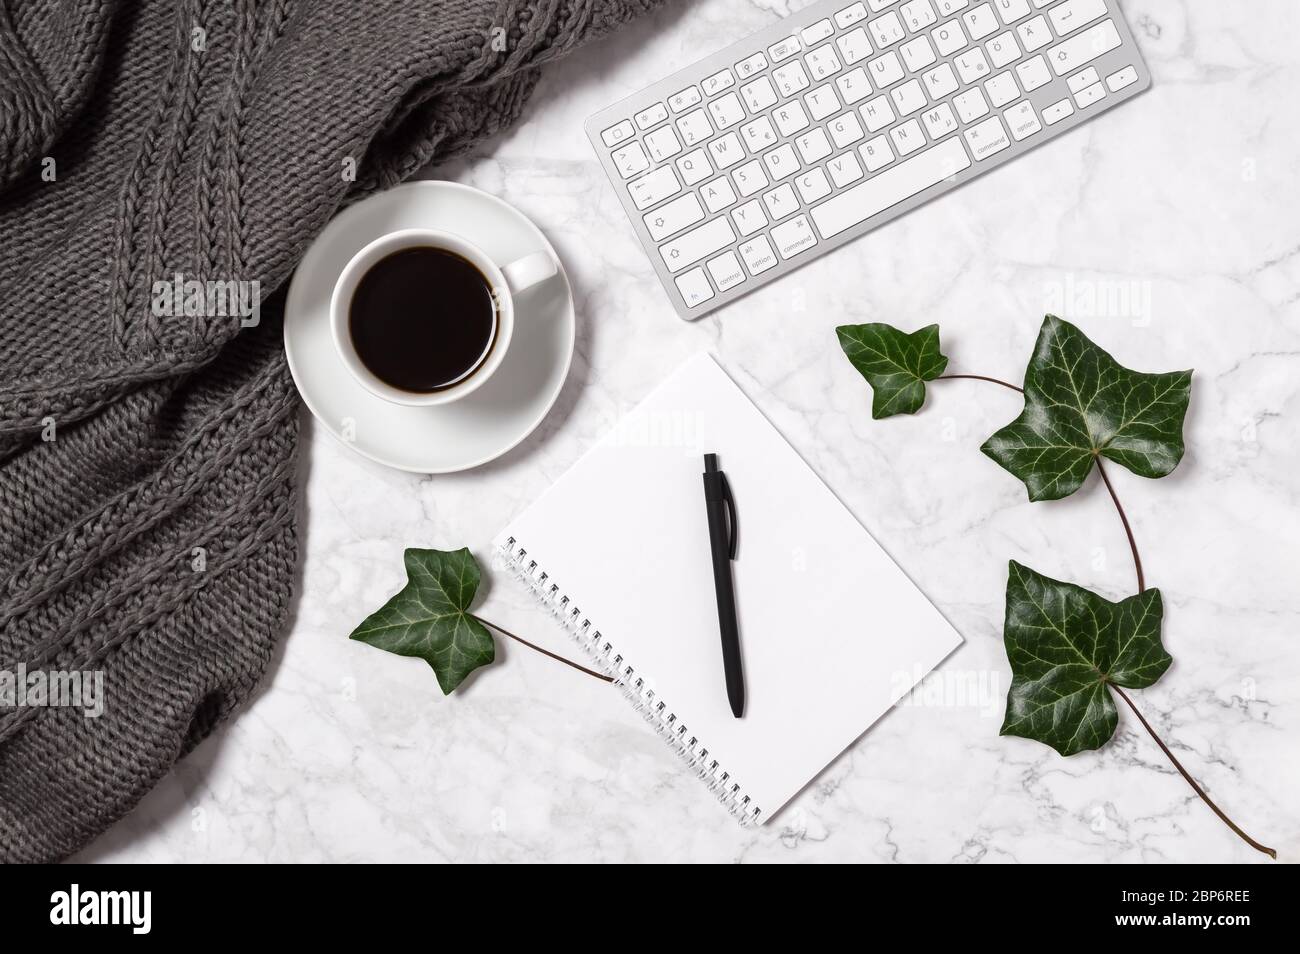 Cozy home office workspace. Marble desk with warm wool plaid, green ivy leaves, coffee cup, keyboard, blank paper in notebook and pen in black and whi Stock Photo